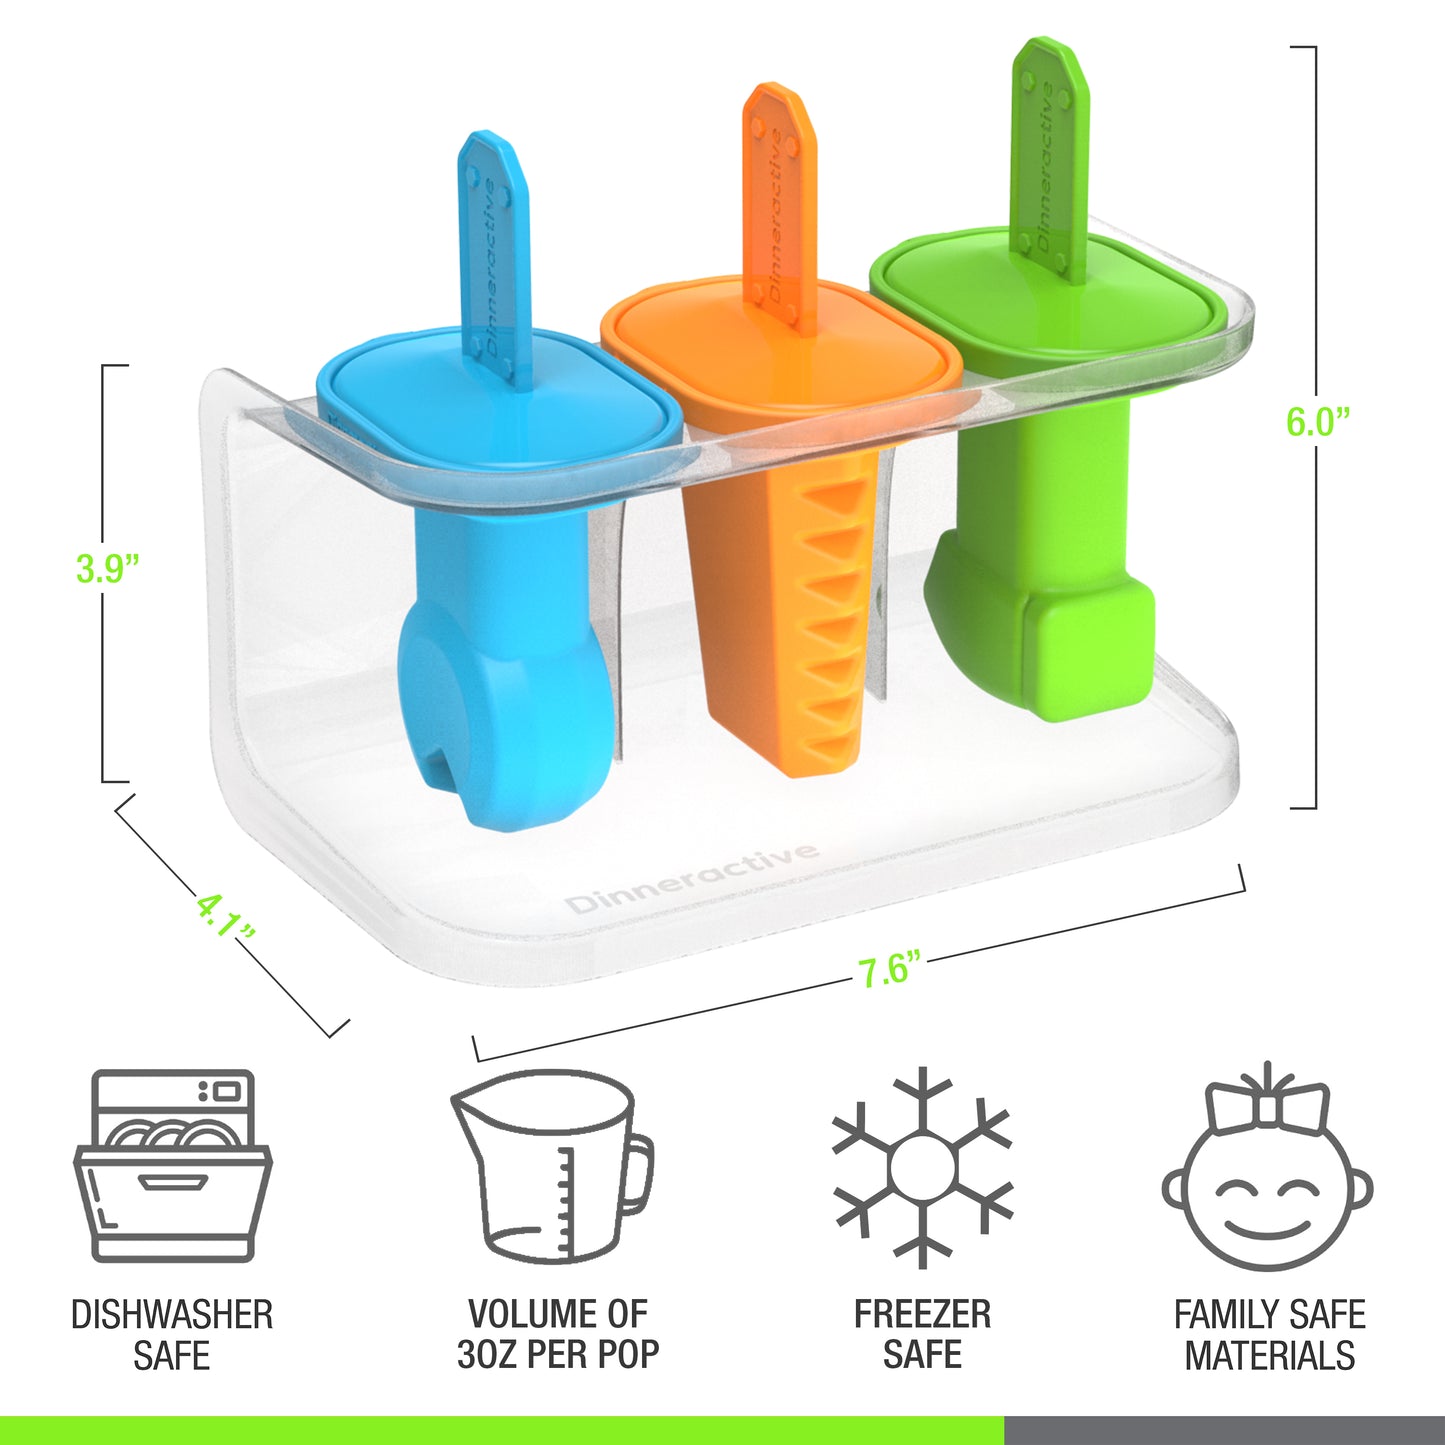 Tool Themed<BR> Play Pops<BR> (3 Ice Pop Molds + Tray)